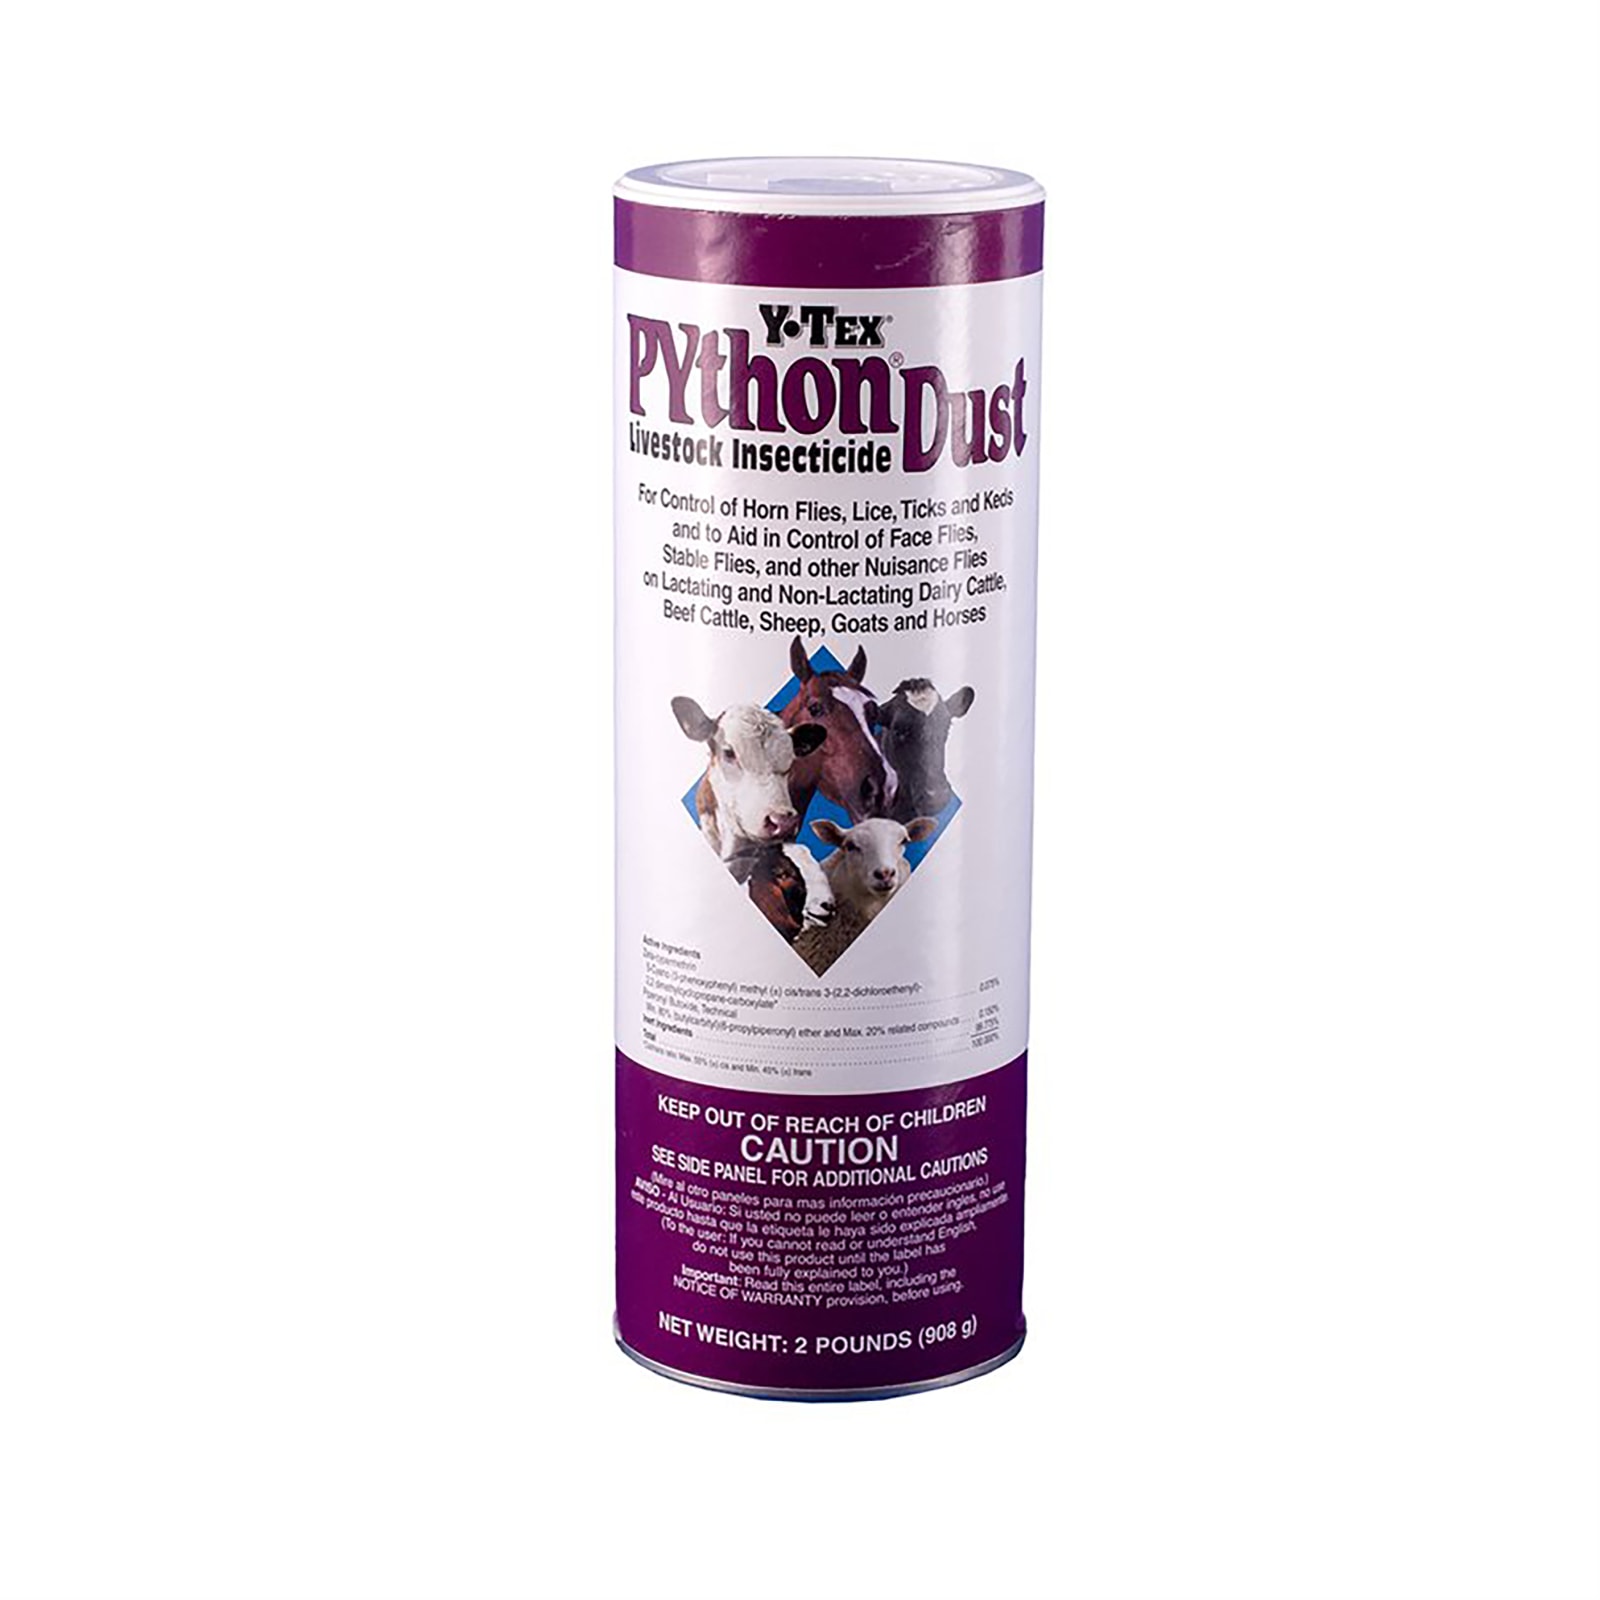 2 lb Python Dust Livestock Insecticide by Y-Tex at Fleet Farm